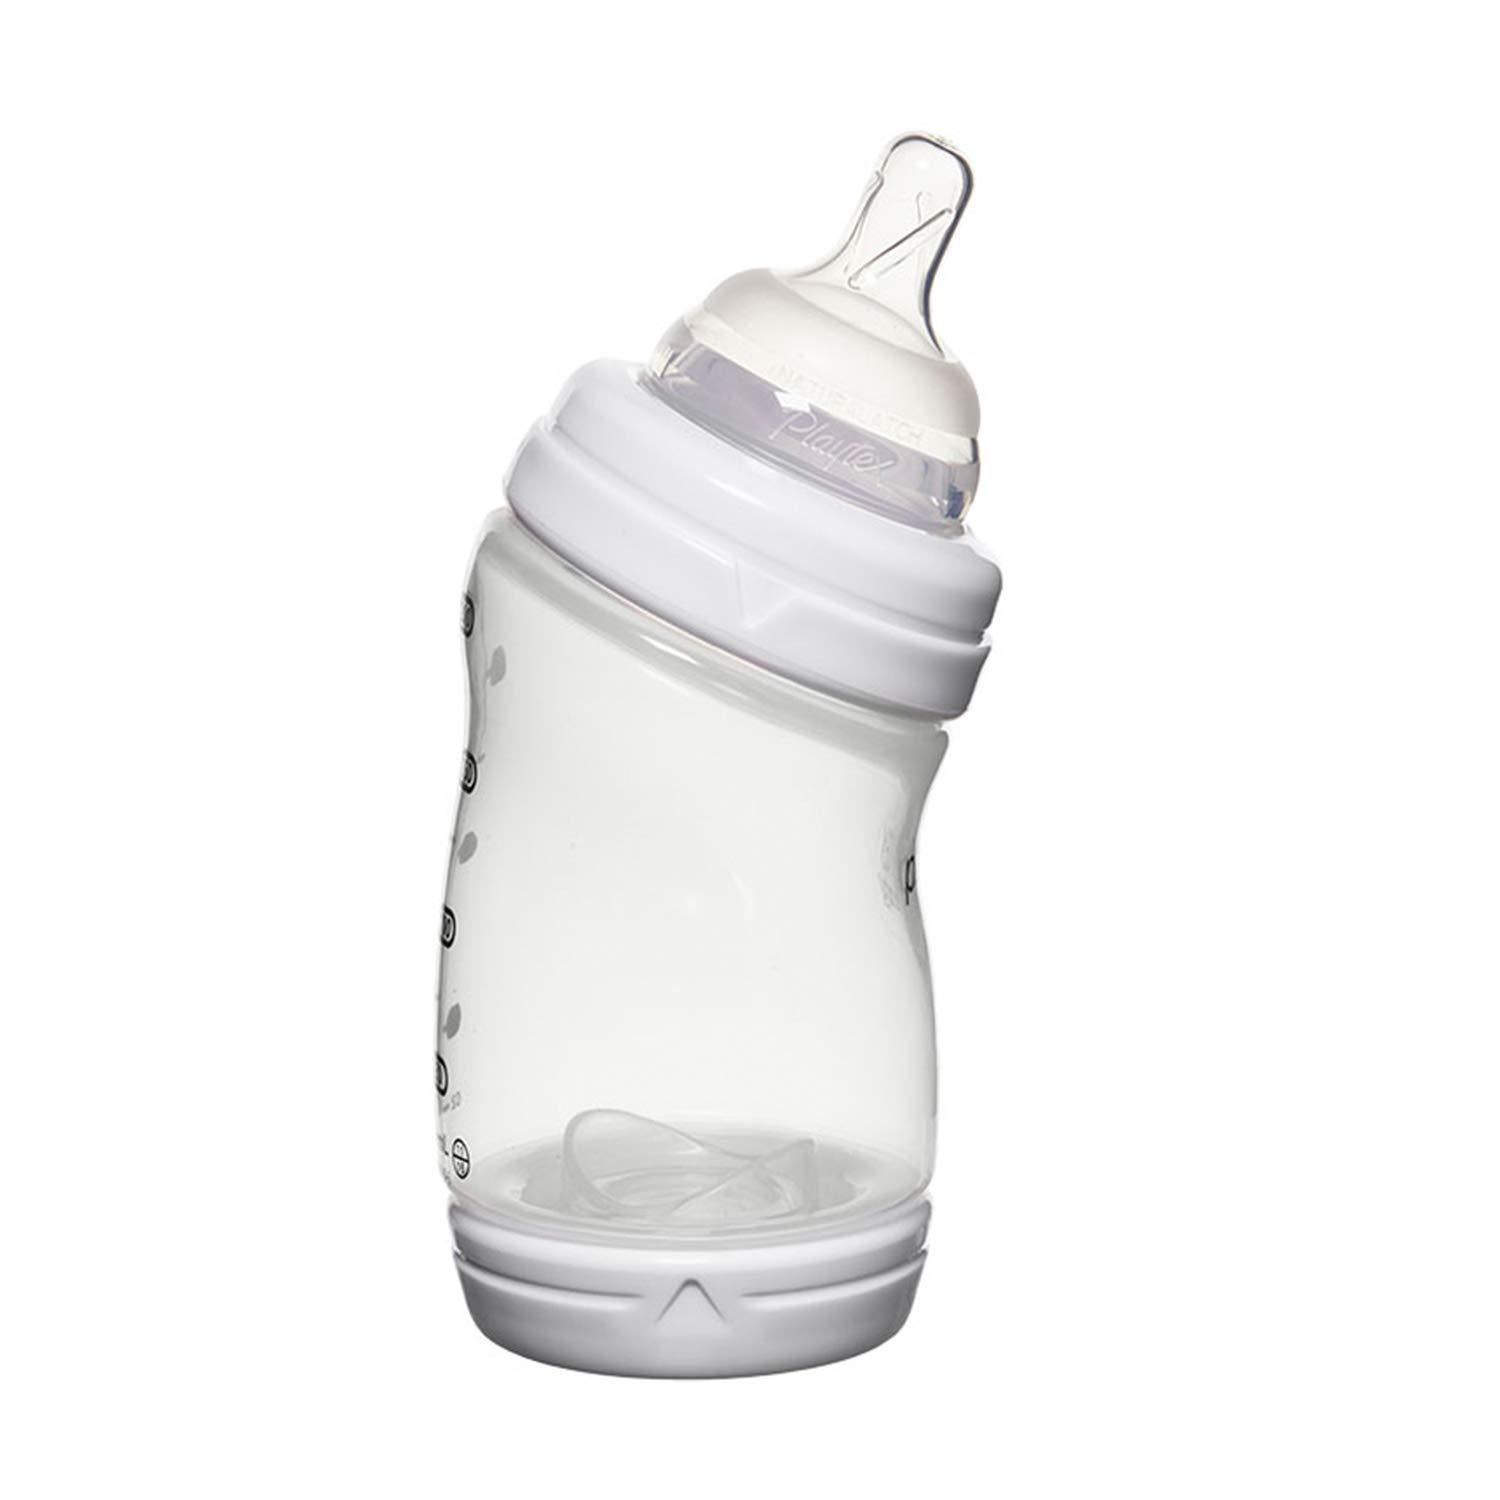 Playtex Baby's Ventaire 9oz Bottle 3-Pack